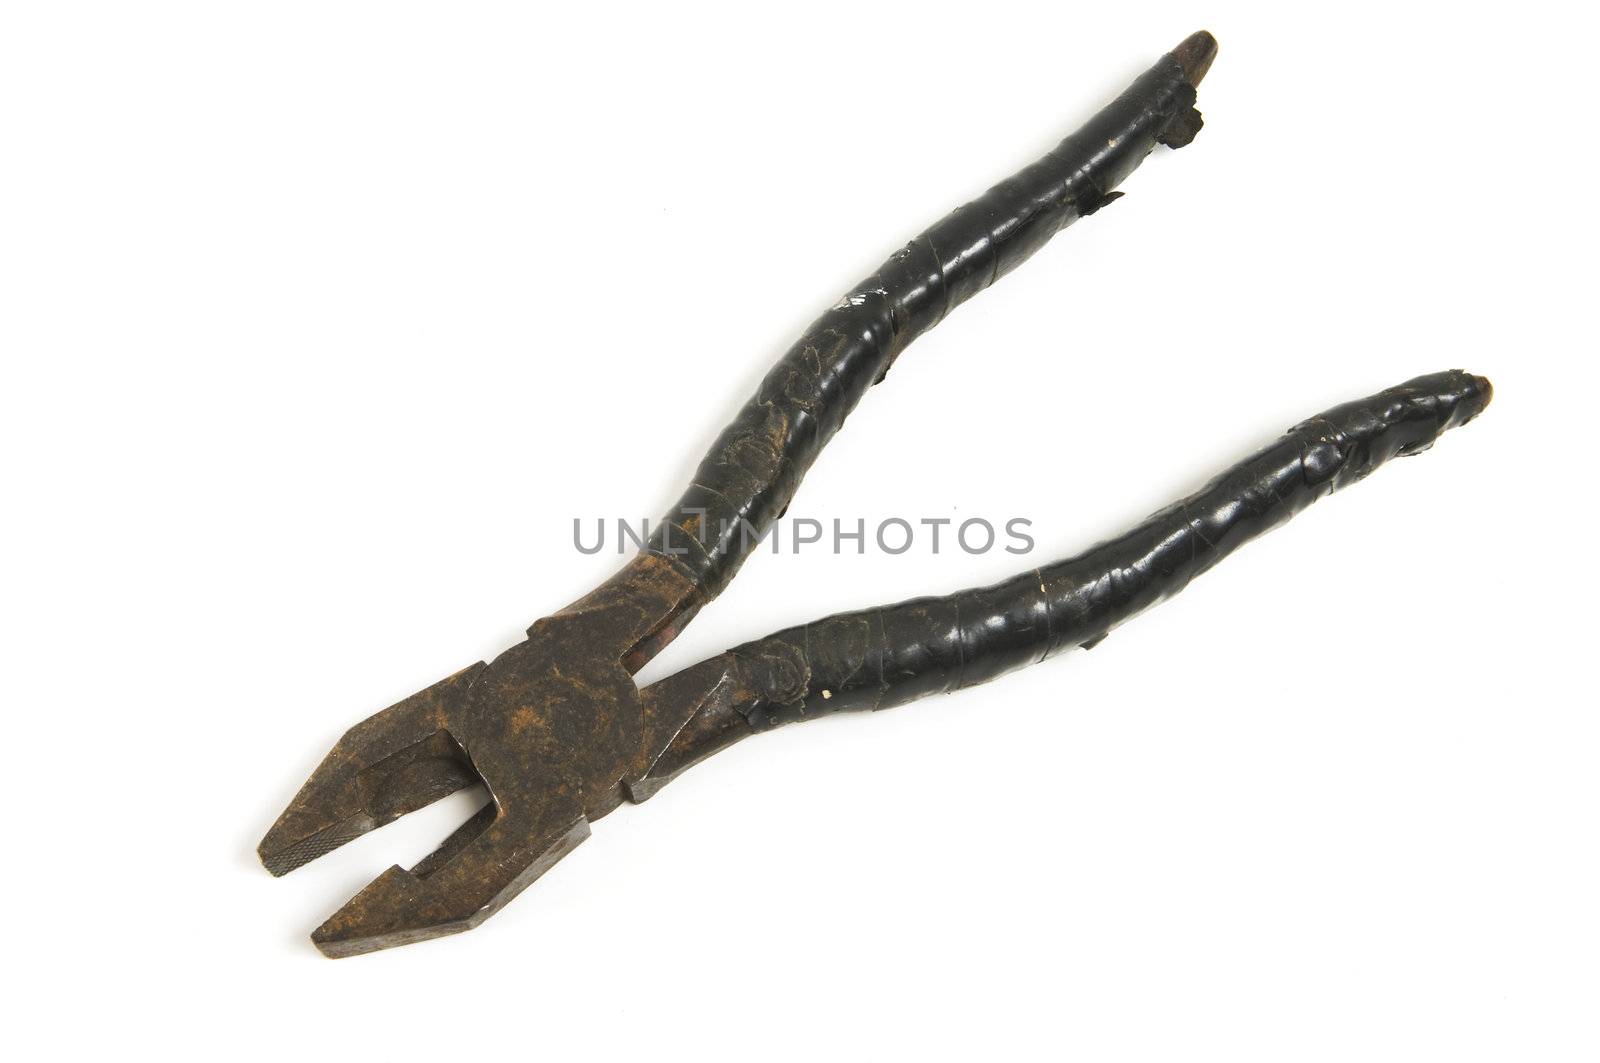 Old pair of pliers isolated on a white background